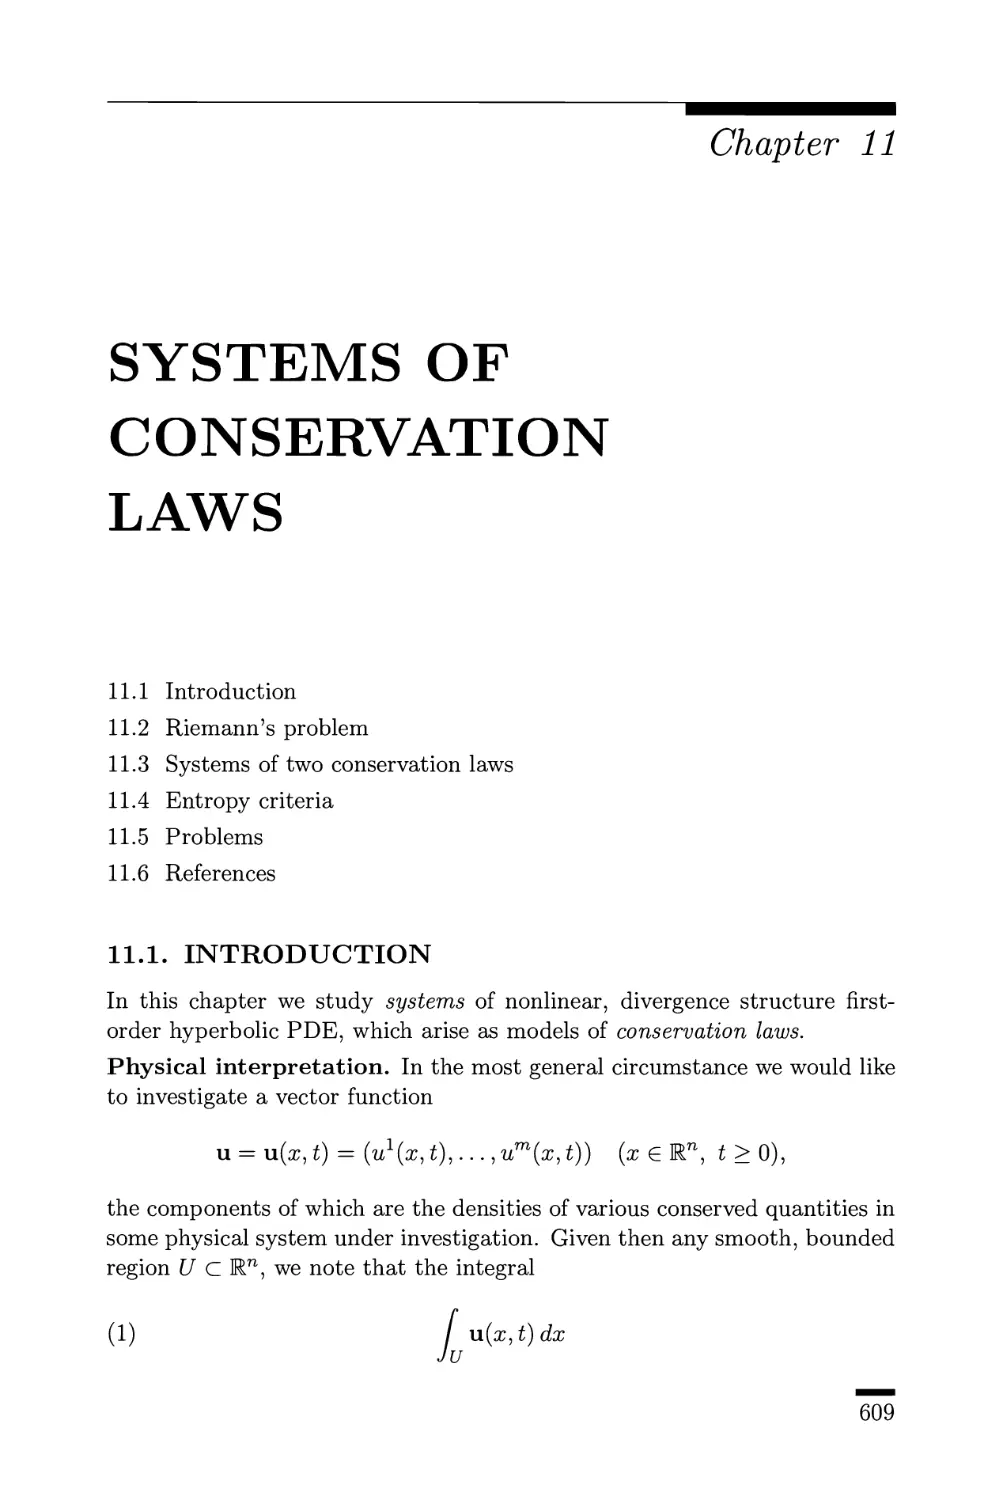 11. Systems of Conservation Laws